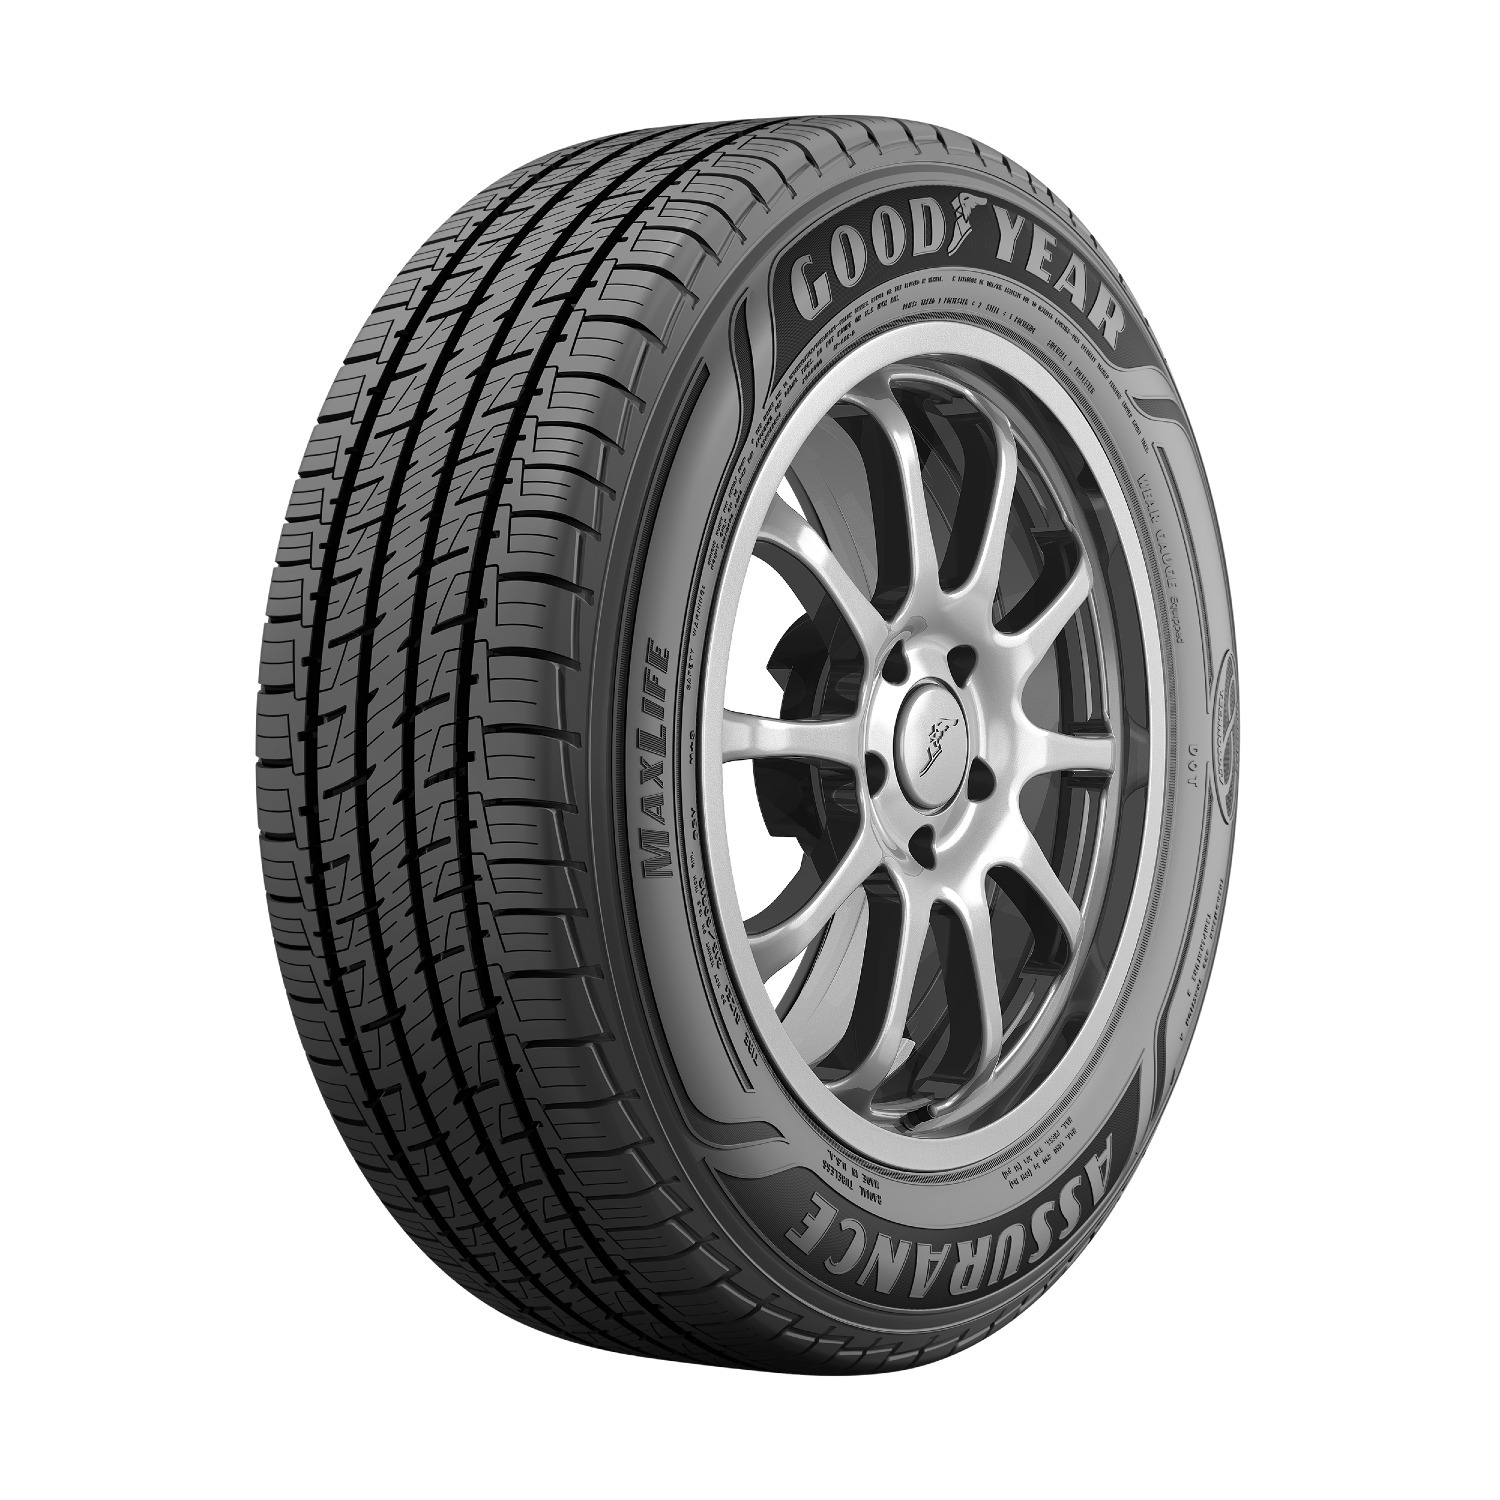 tire-agent-set-of-4-select-goodyear-tires-up-to-75-off-via-rebate